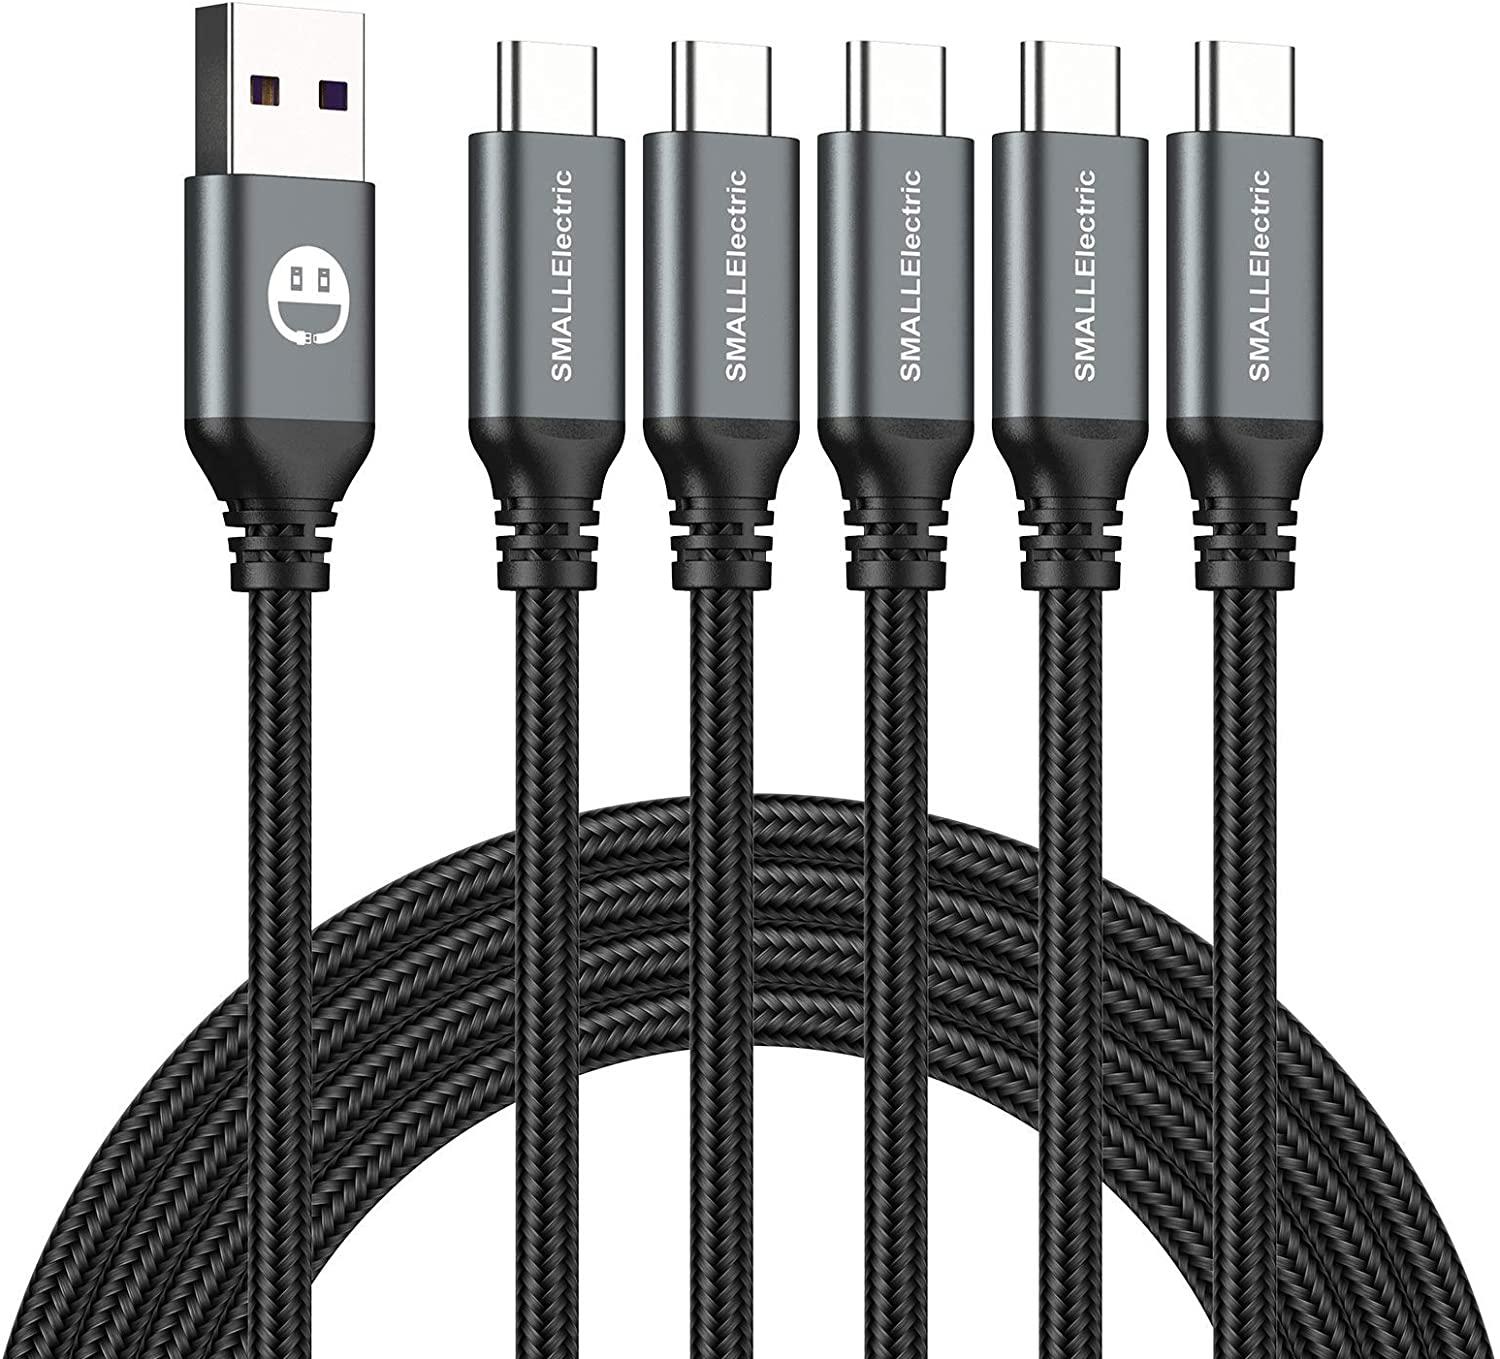 5 USB Type-C Cables for $6.96